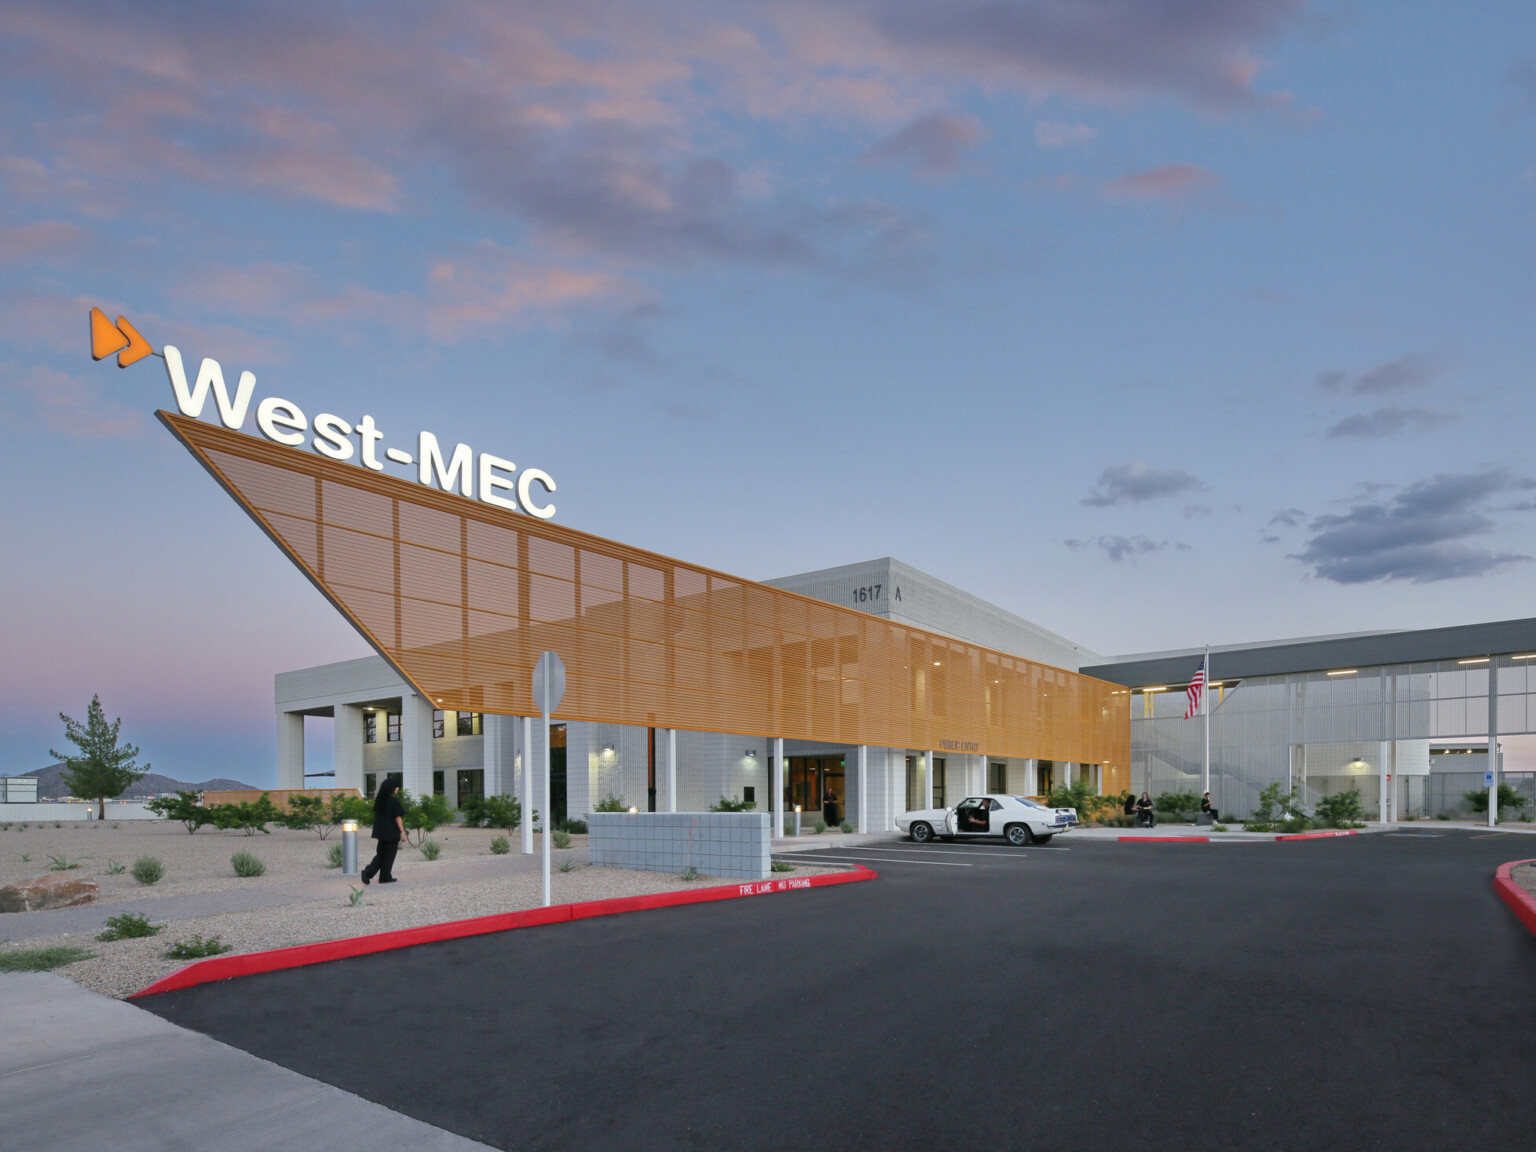 West-MEC Northeast Campus entrance with illuminated sign on top of orange perforated sunscreen extending past entrance